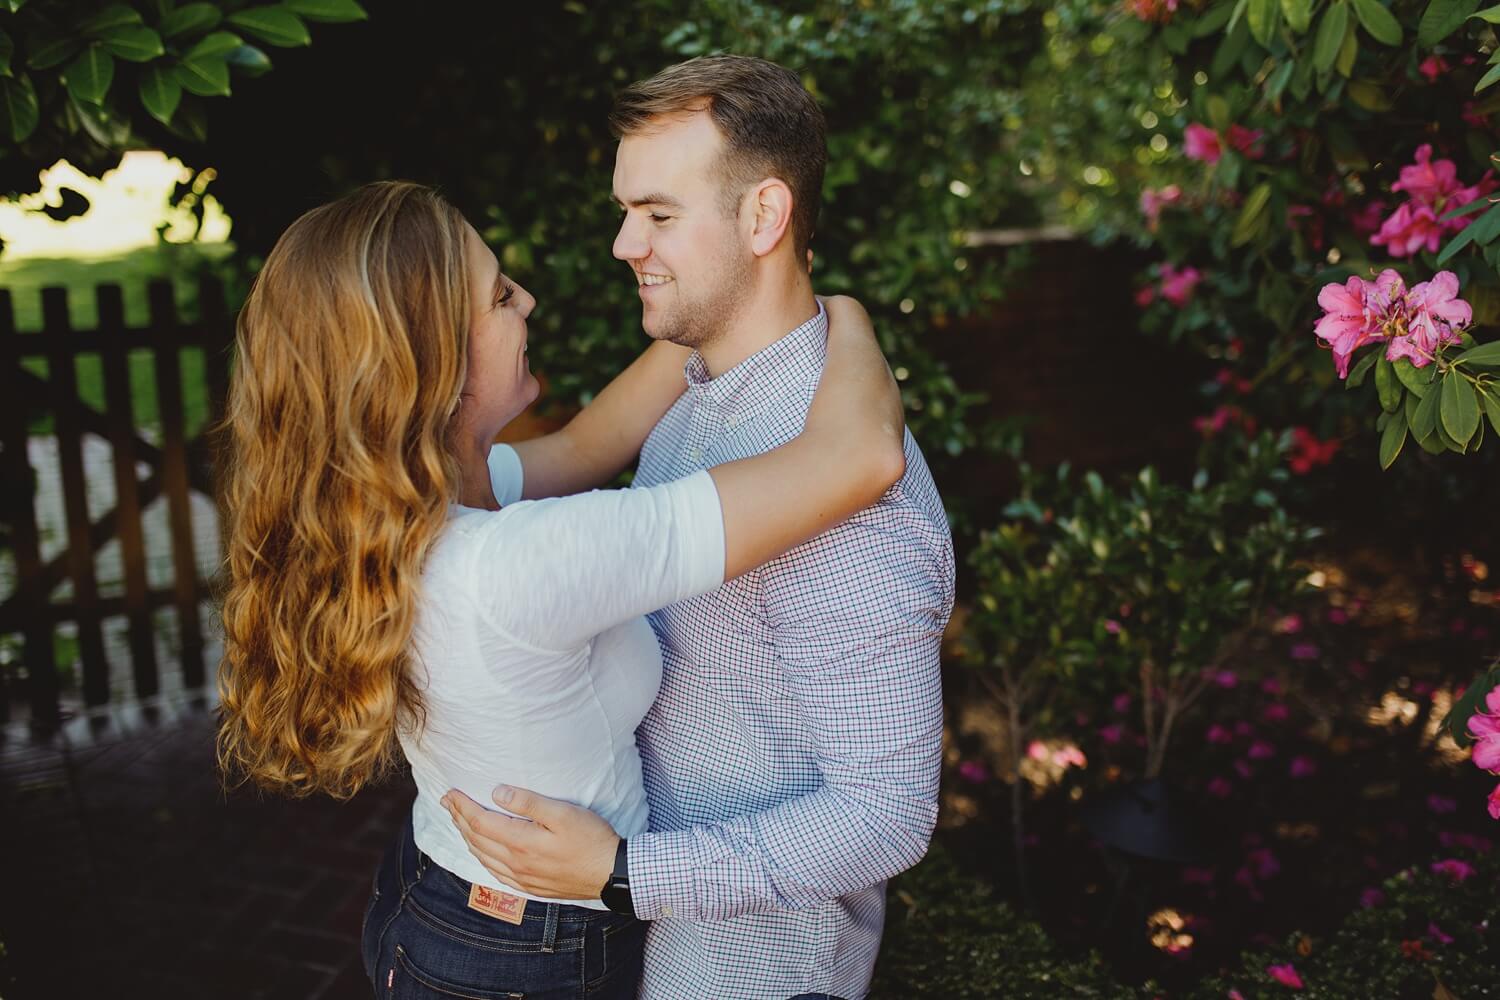 downtown palo alto backyard garden engagement shoot formal and cute trees morning engagement photos bay area engagement photographer sf wedding photos